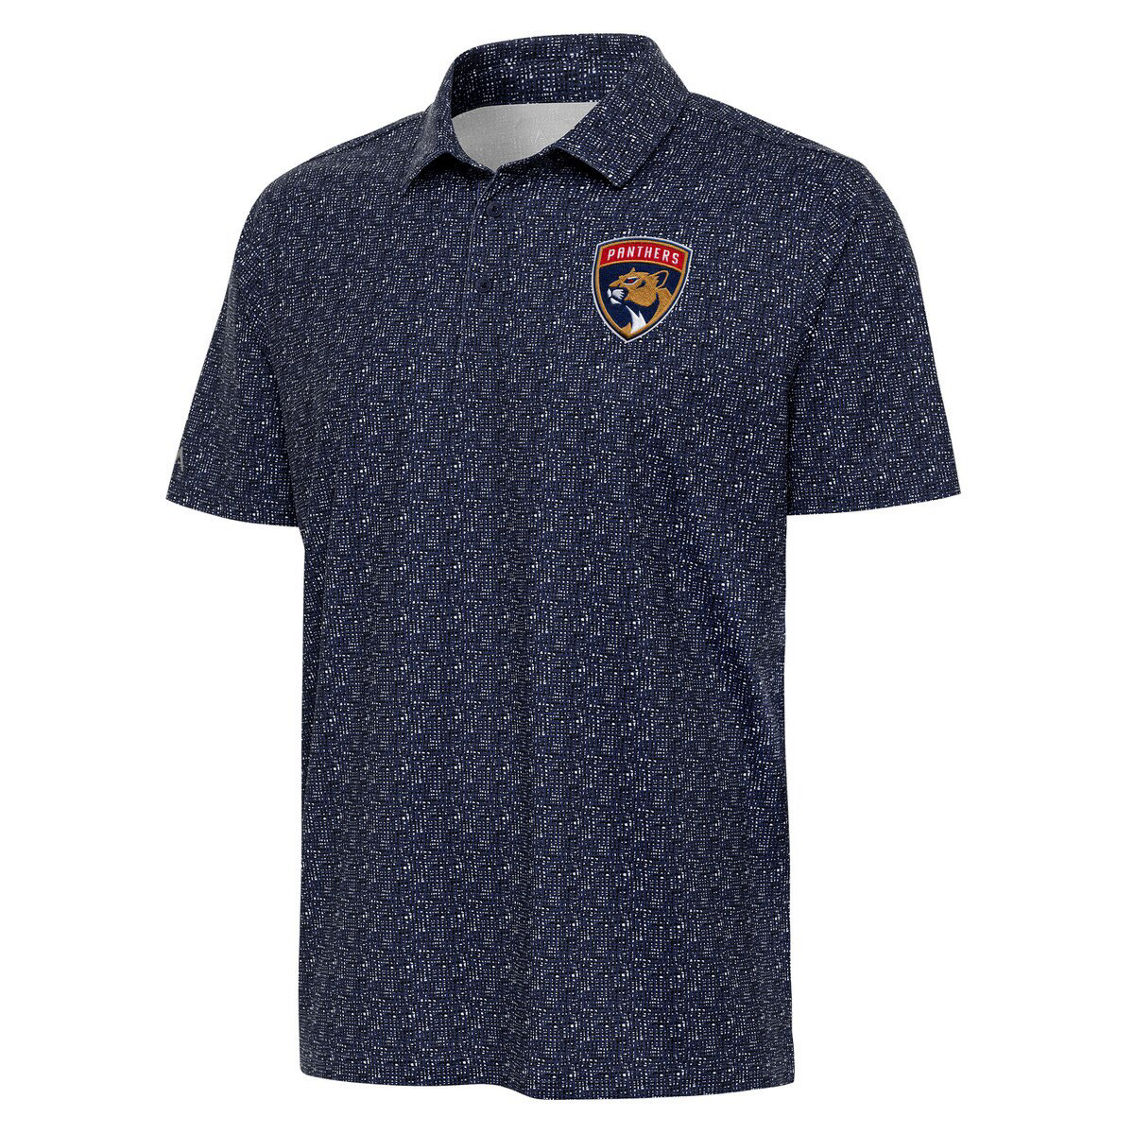 Antigua Men's Navy Florida Panthers Figment Polo - Image 2 of 2